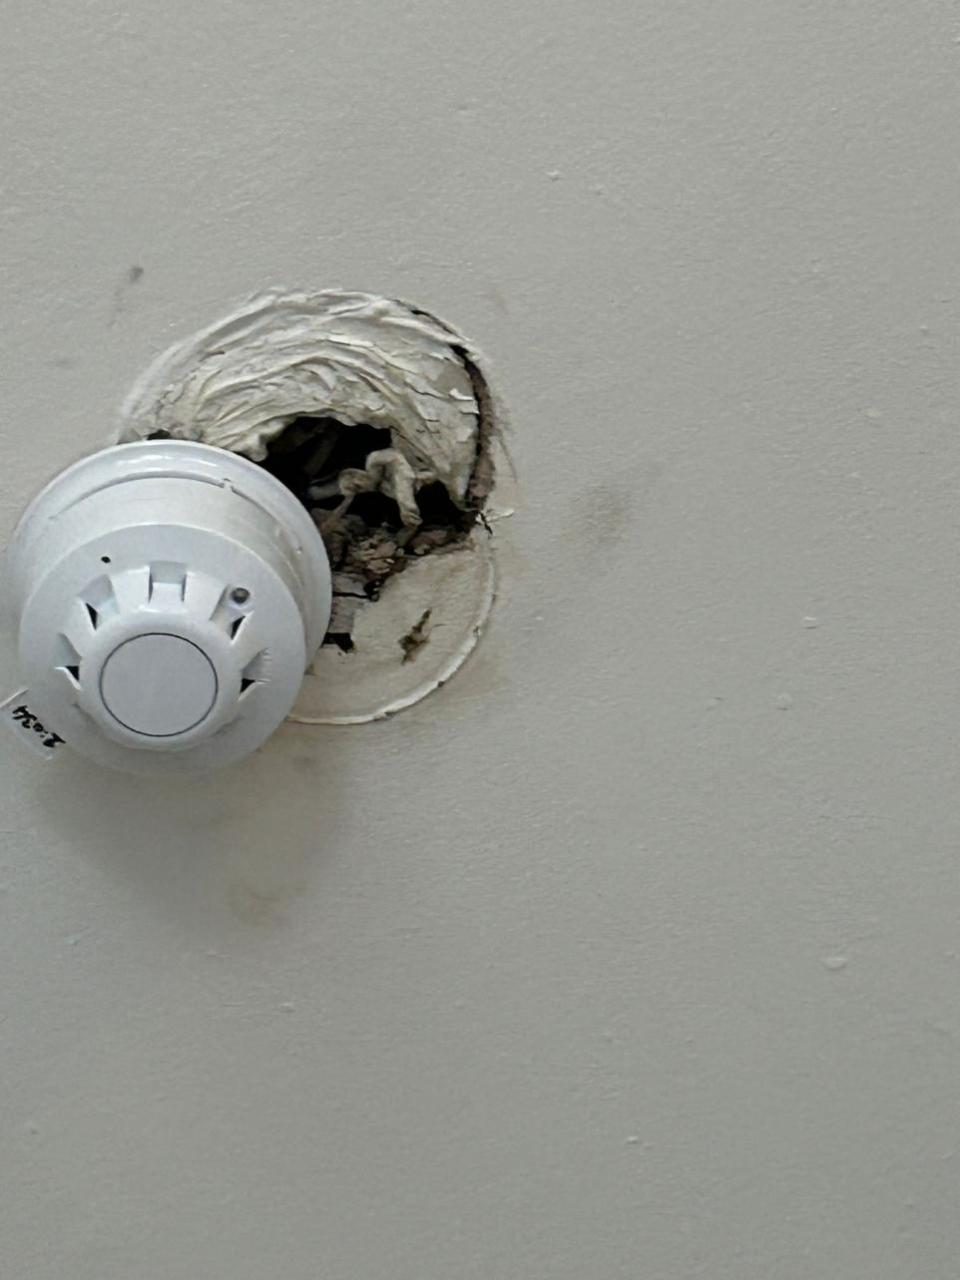 Glasgow Times: The smoke alarm appeared to be broken 